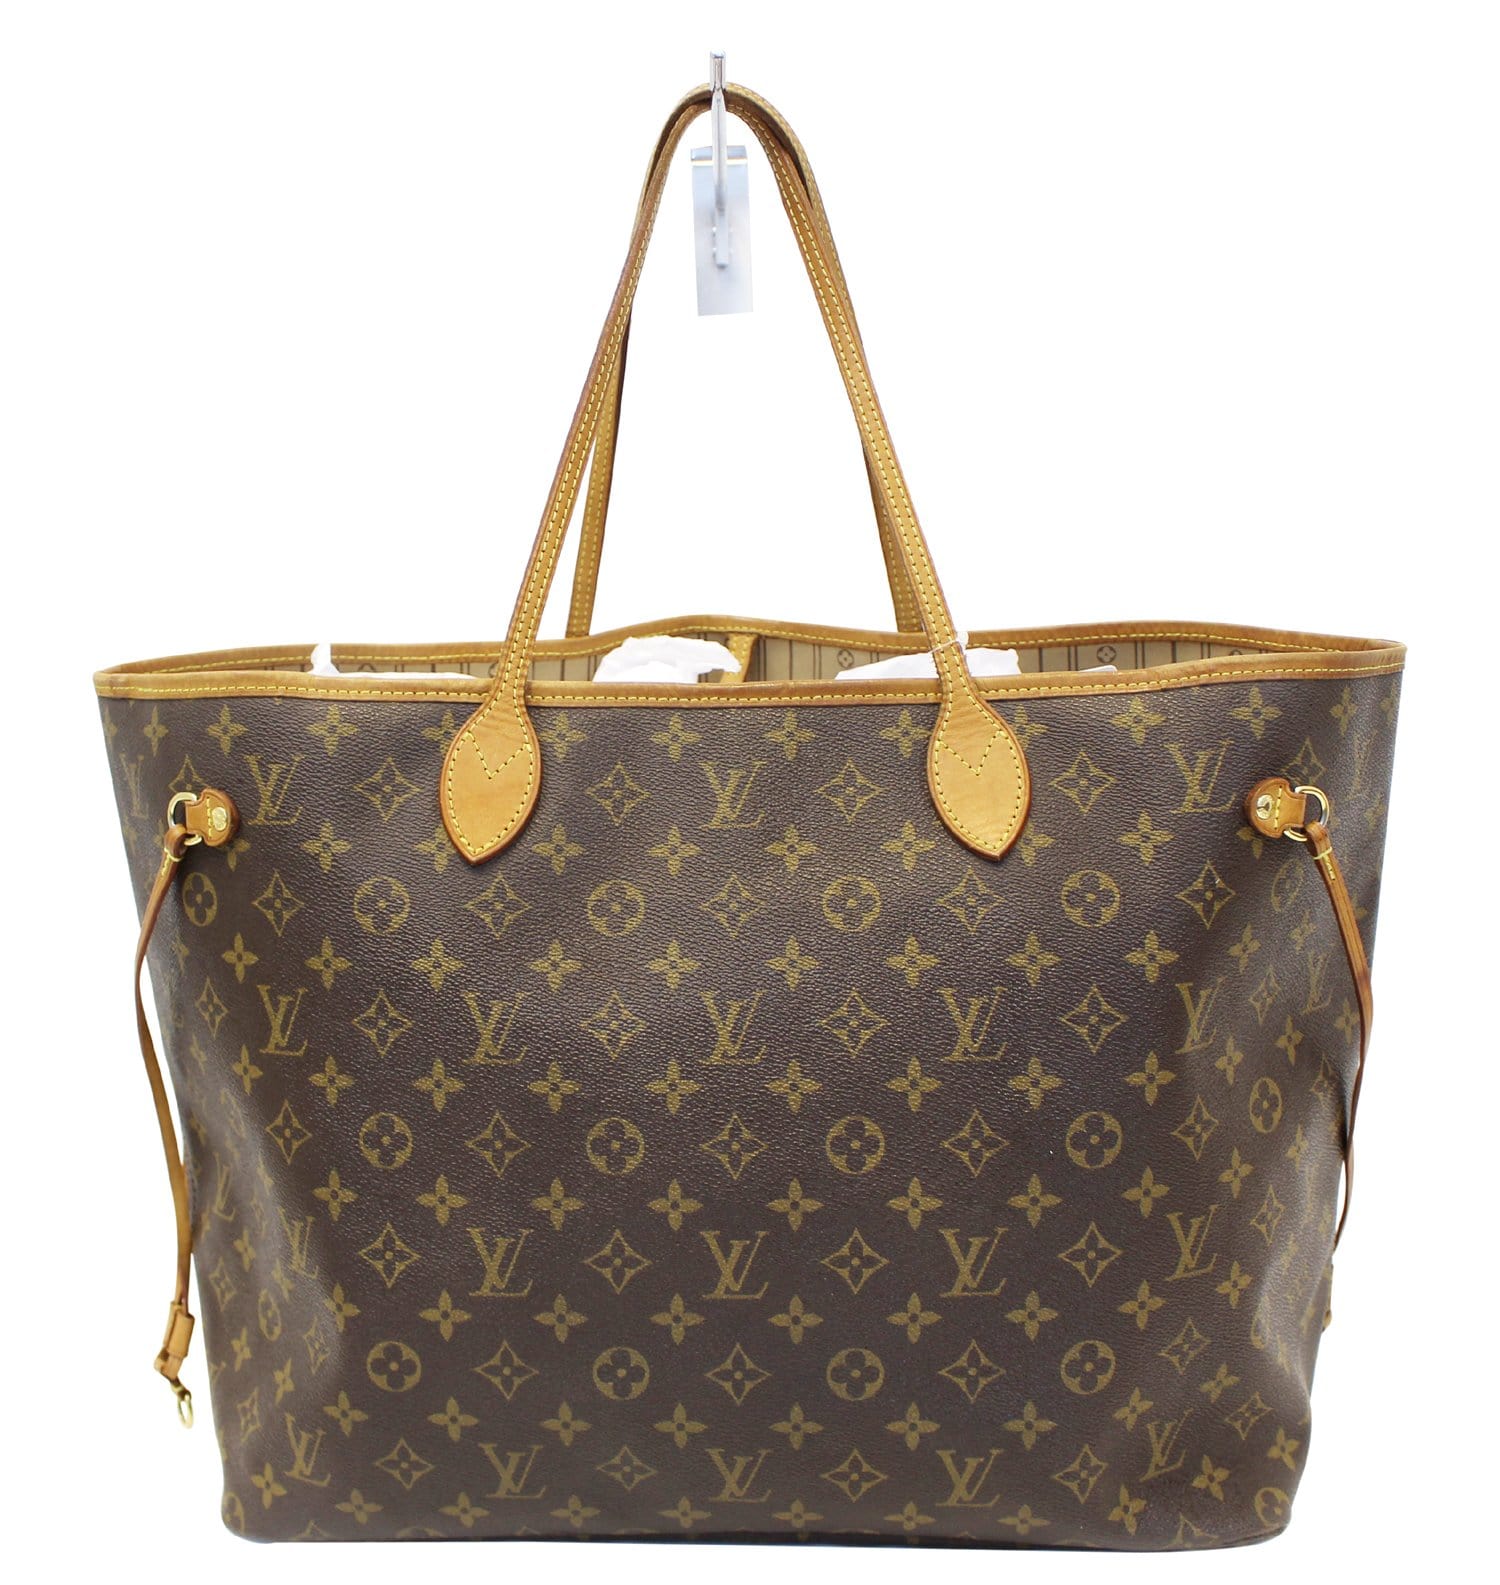  LOUIS  VUITTON  Pre Owned Tote  Bag Monogram Canvas Neverfull  